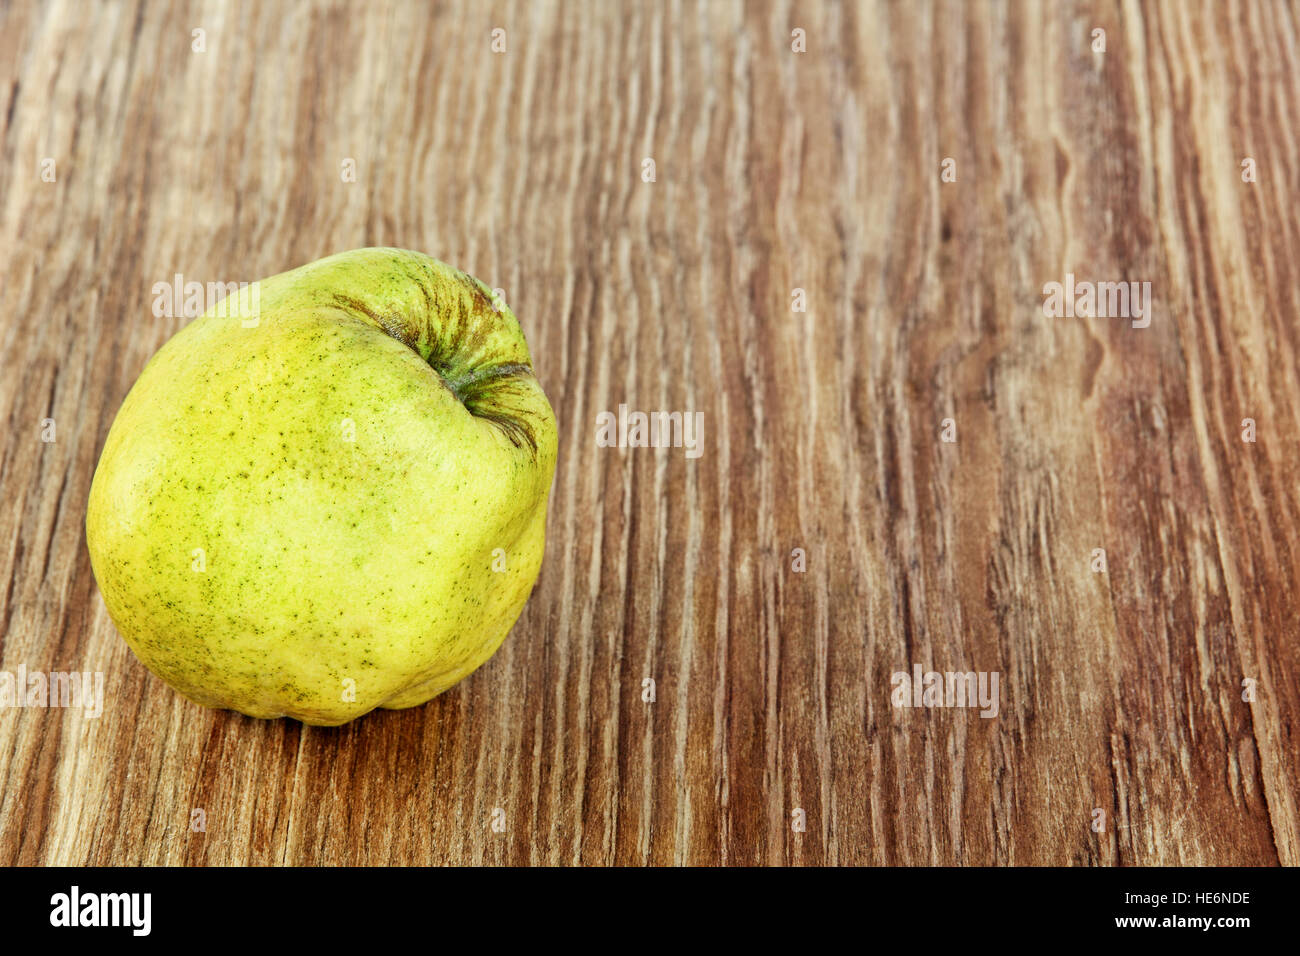 Appetizing ripe quince on grunge wooden background. Stock Photo